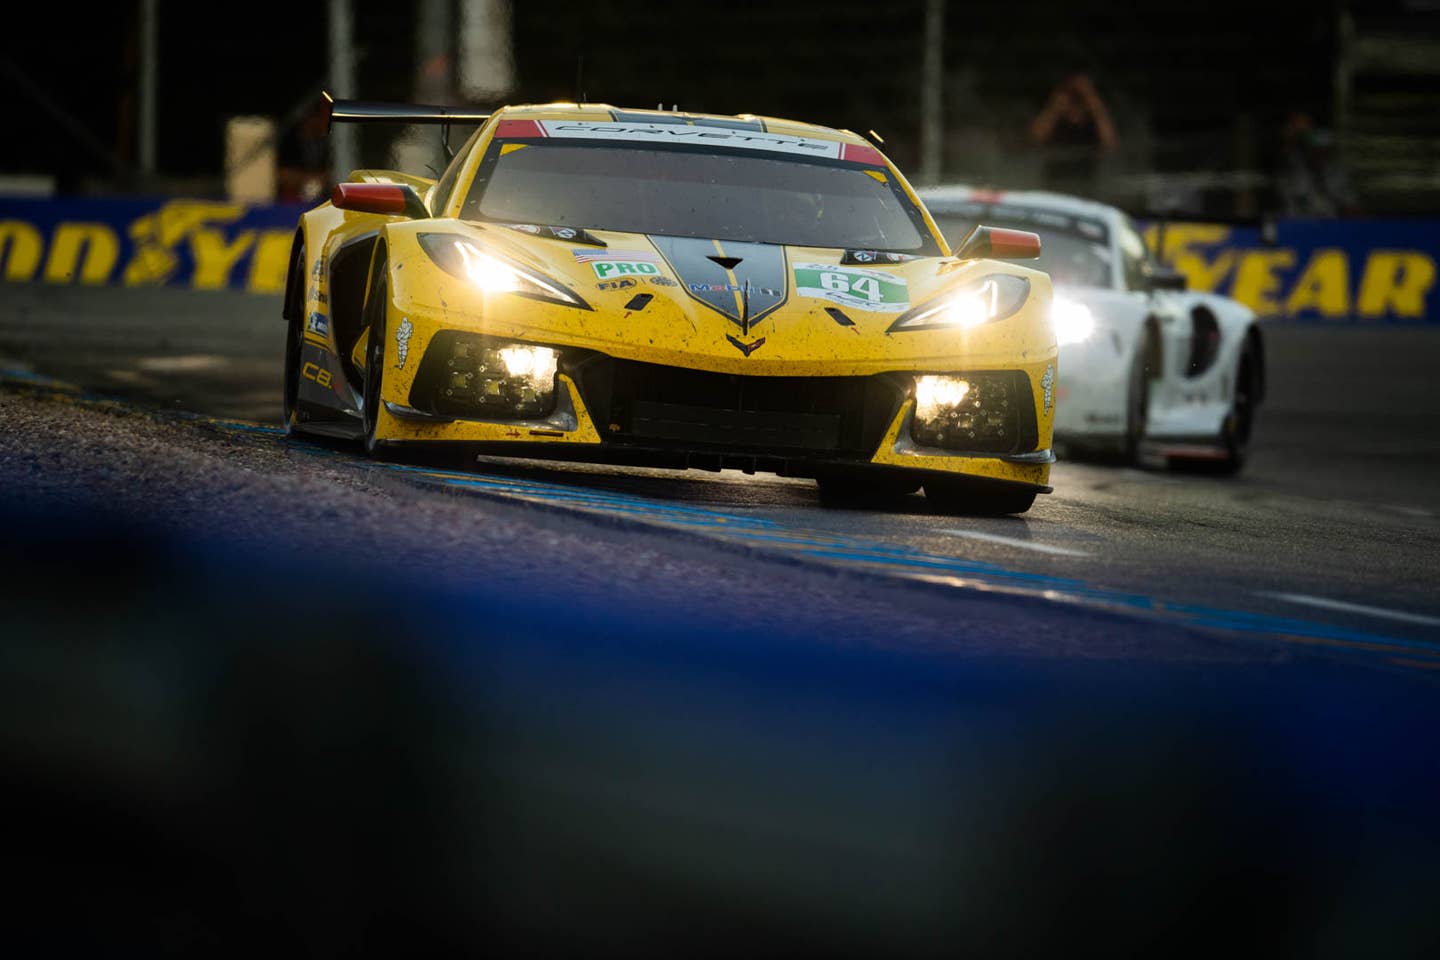 LE MANS, FRANCE - JUNE 11: The #64 Corvette Racing - Chevrolet Corvette C8.R of Tommy Milner, Alexander Sims, and Nick Tandy in action at the Le Mans 24 Hours Race on June 11, 2022 in Le Mans, France. (Photo by James Moy Photography/Getty Images)